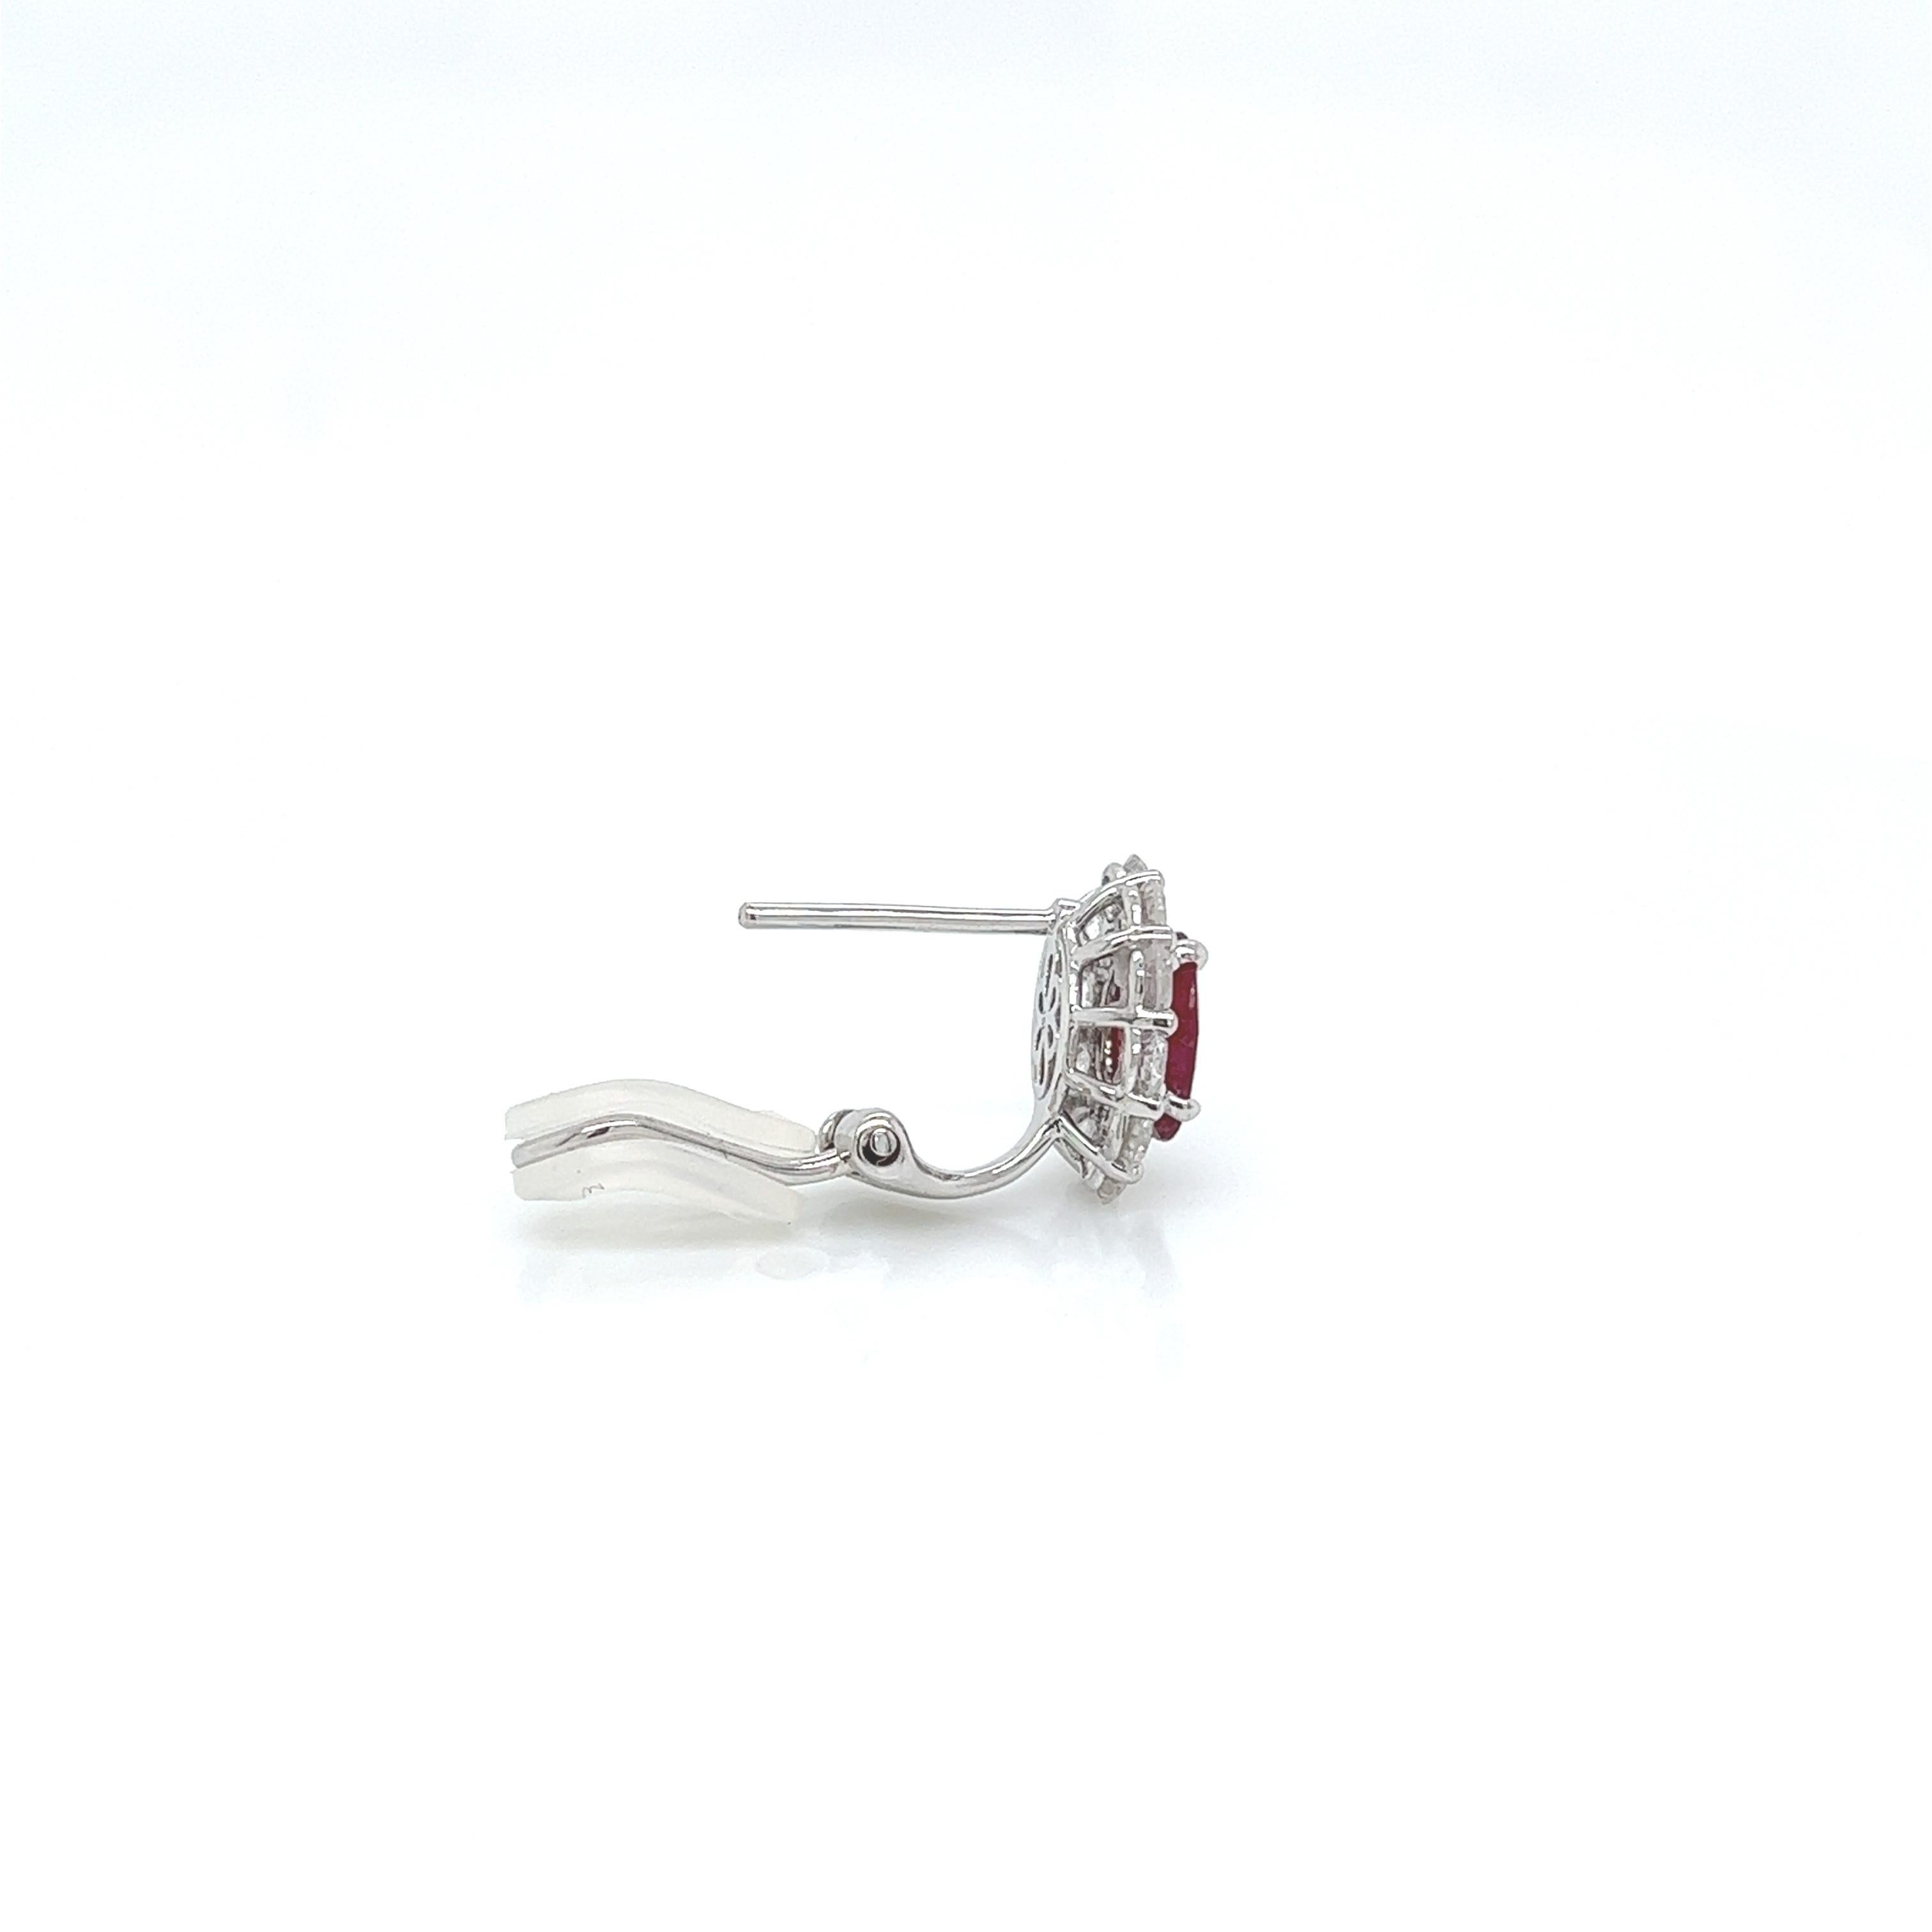 2.84 Total Carat Ruby and Diamond Earrings in 18K White Gold

This gorgeous pair of Ruby earrings are sure to draw all eyes on you. It is created with a single 1.54 Carat Oval Ruby, surrounded by a halo of round cut diamonds totaling a generous 1.30